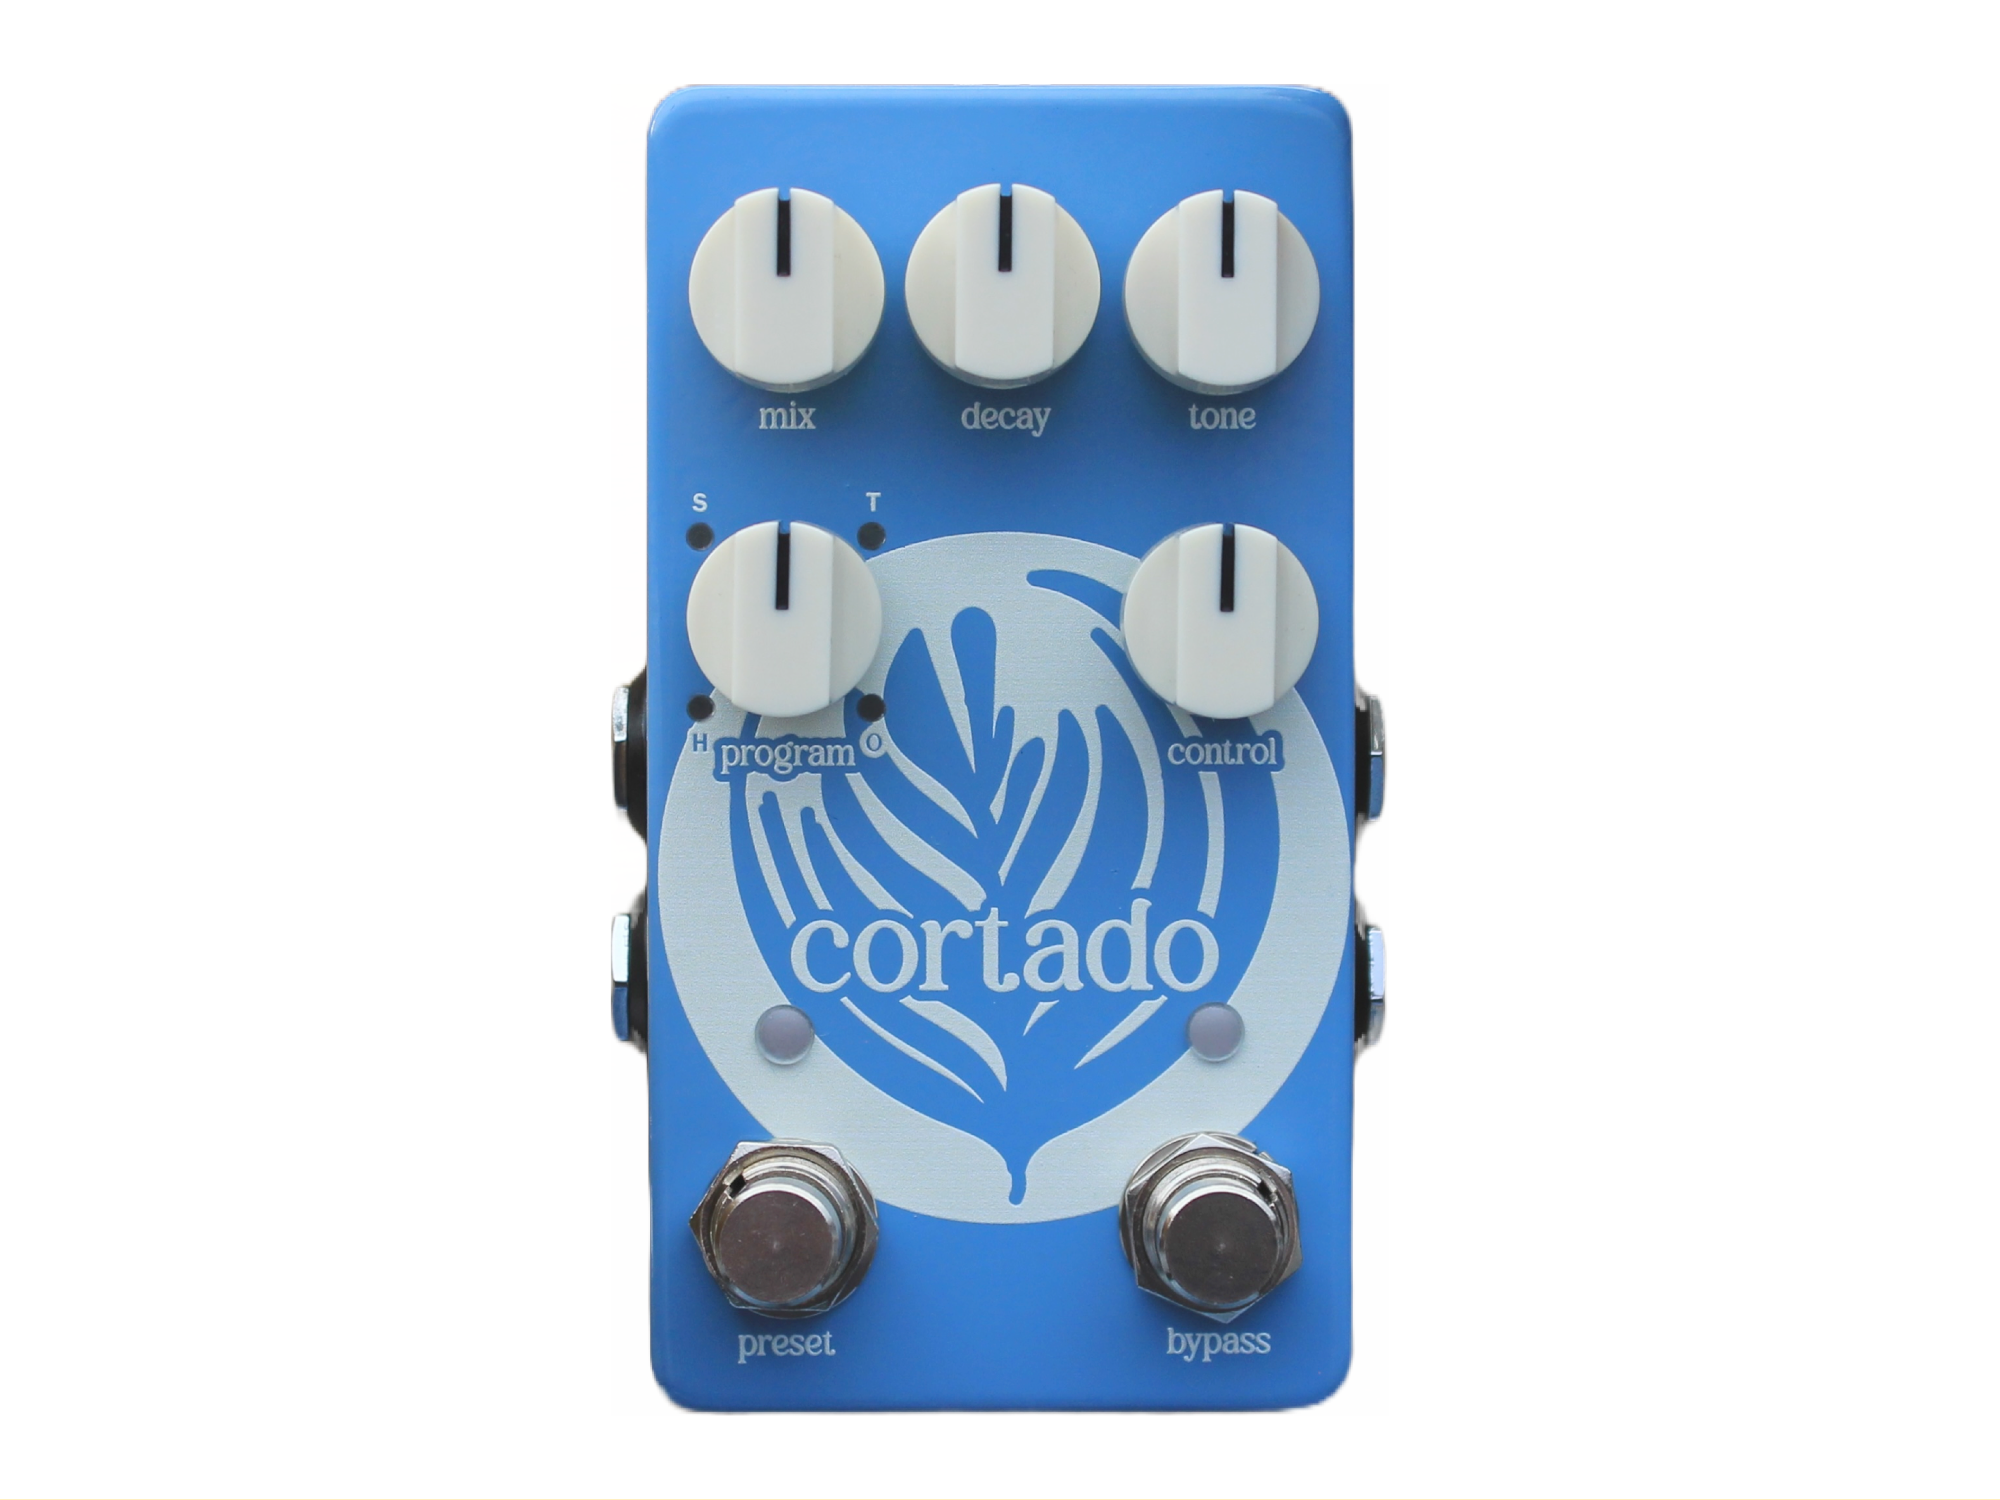 Coffee Shop Pedals Launches the Cortado Reverb